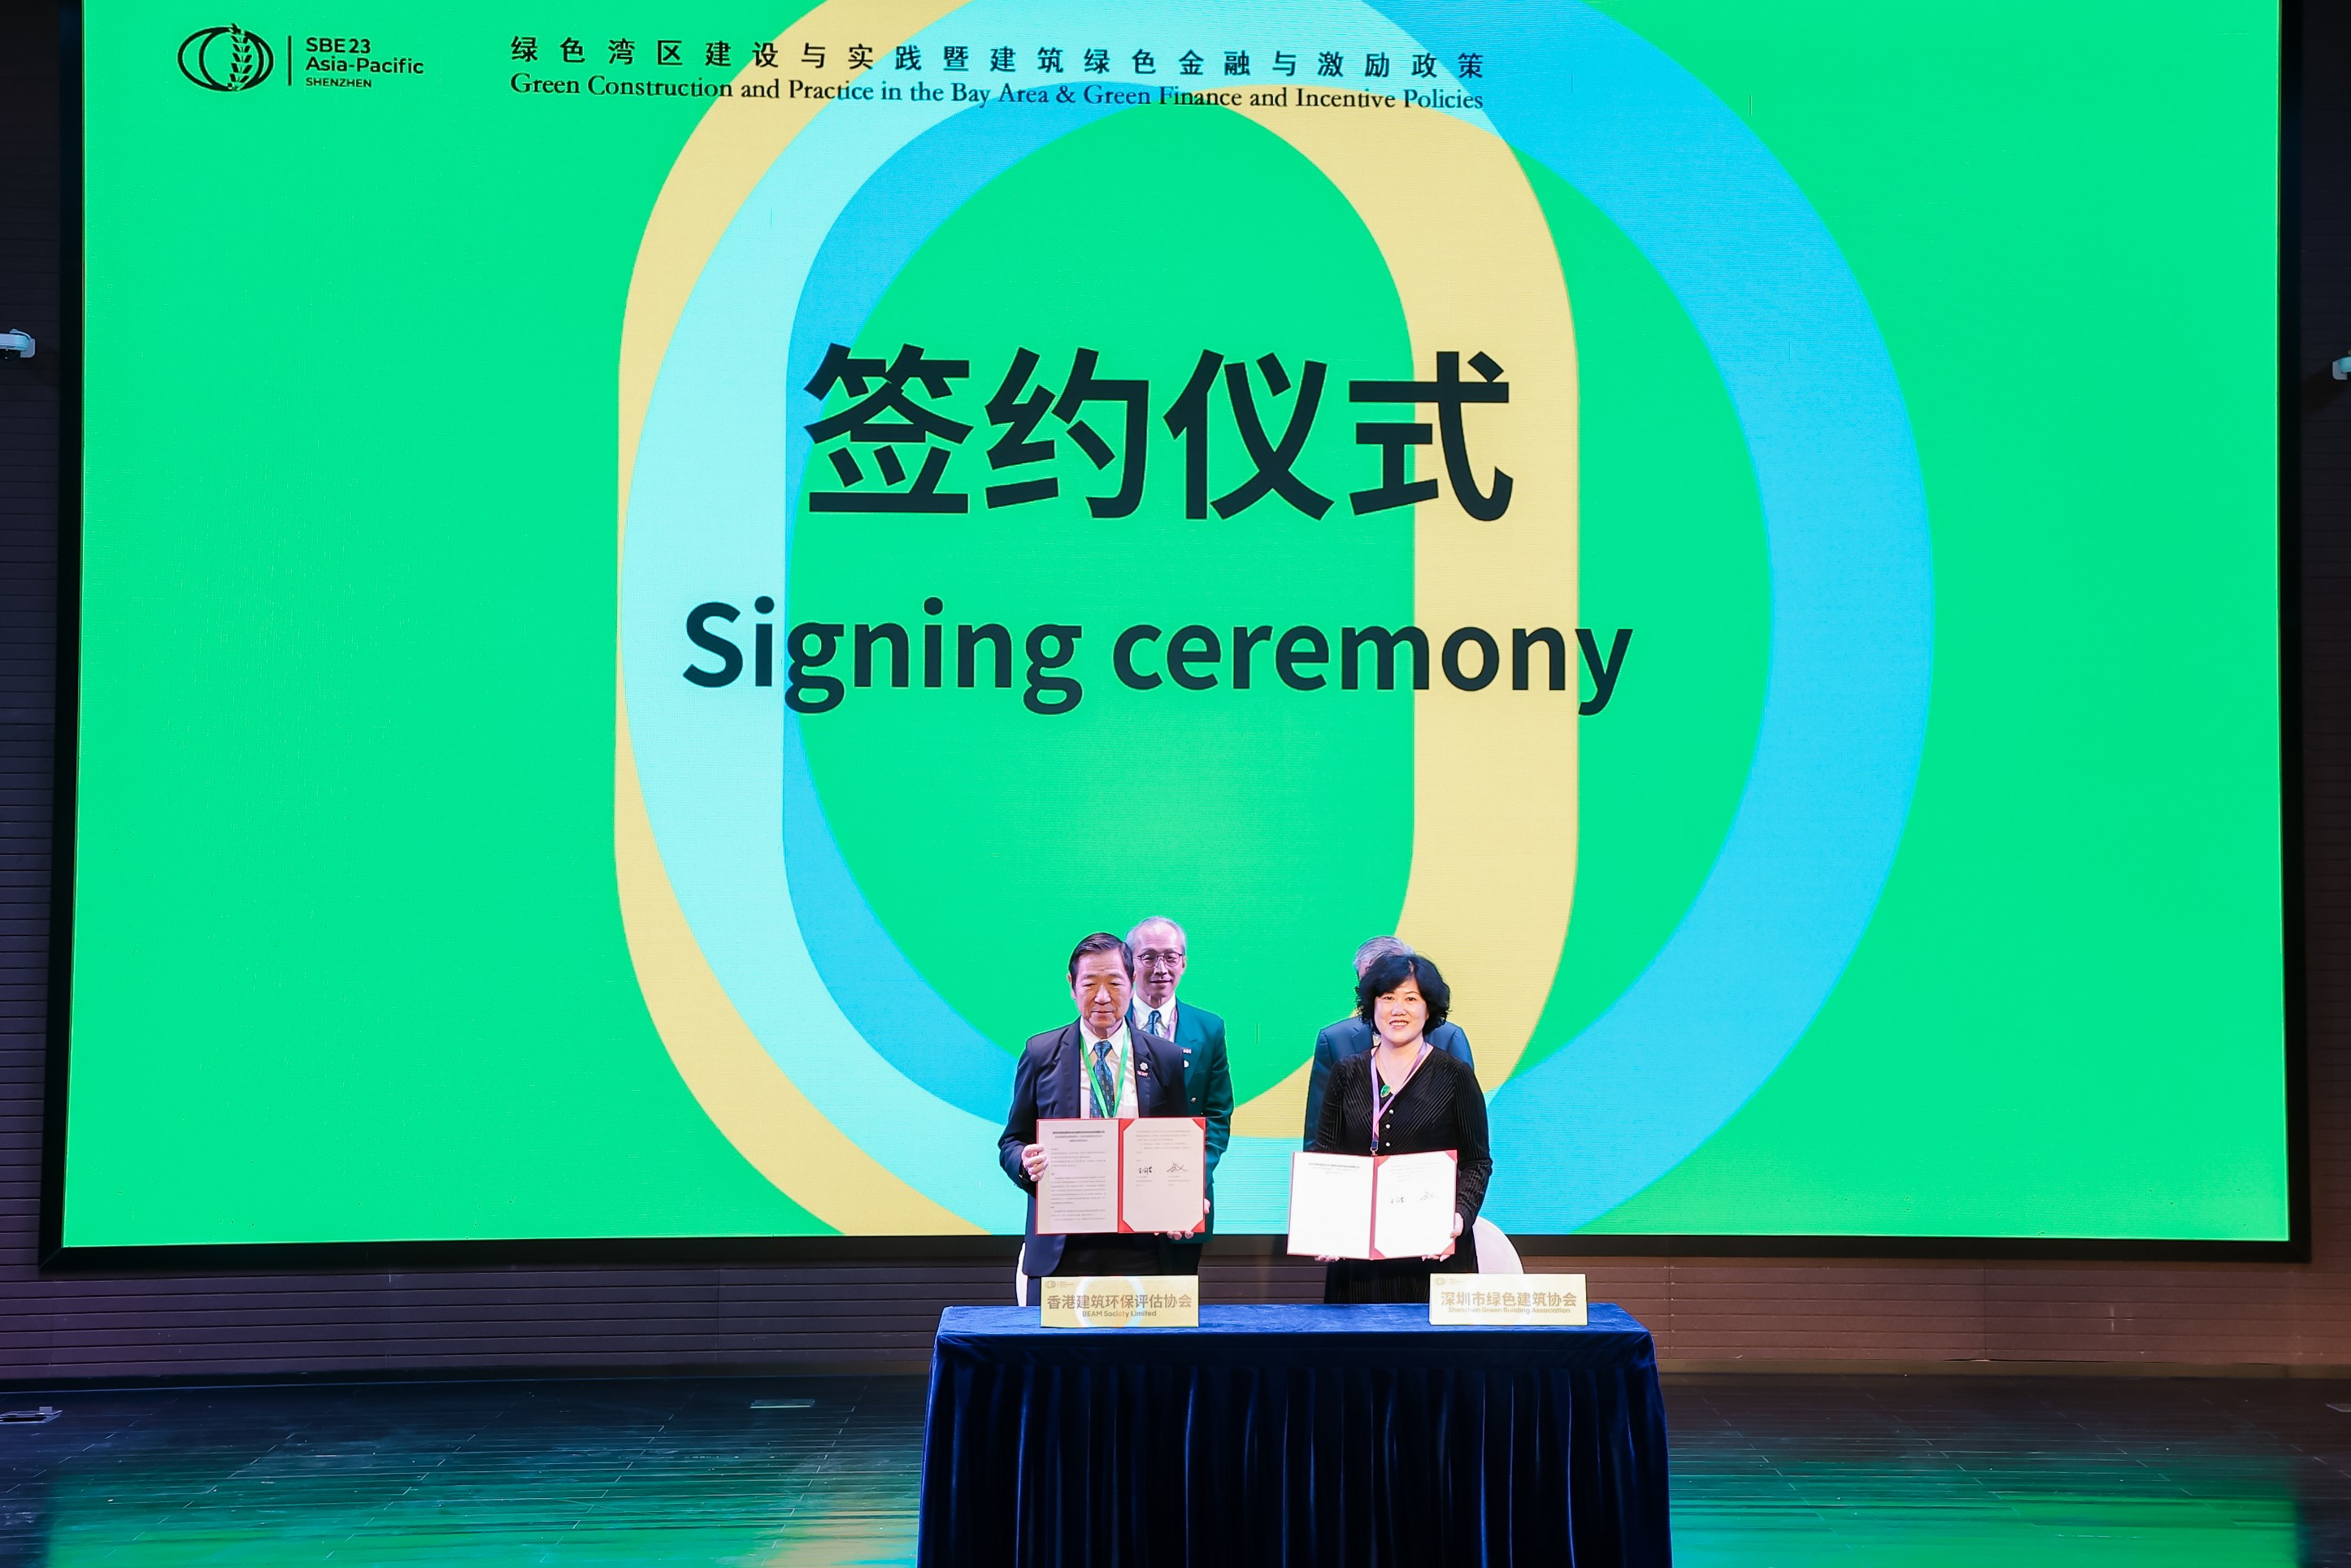 MoU Signing Ceremony of Shenzhen Green Building Association and BEAM Society Limited